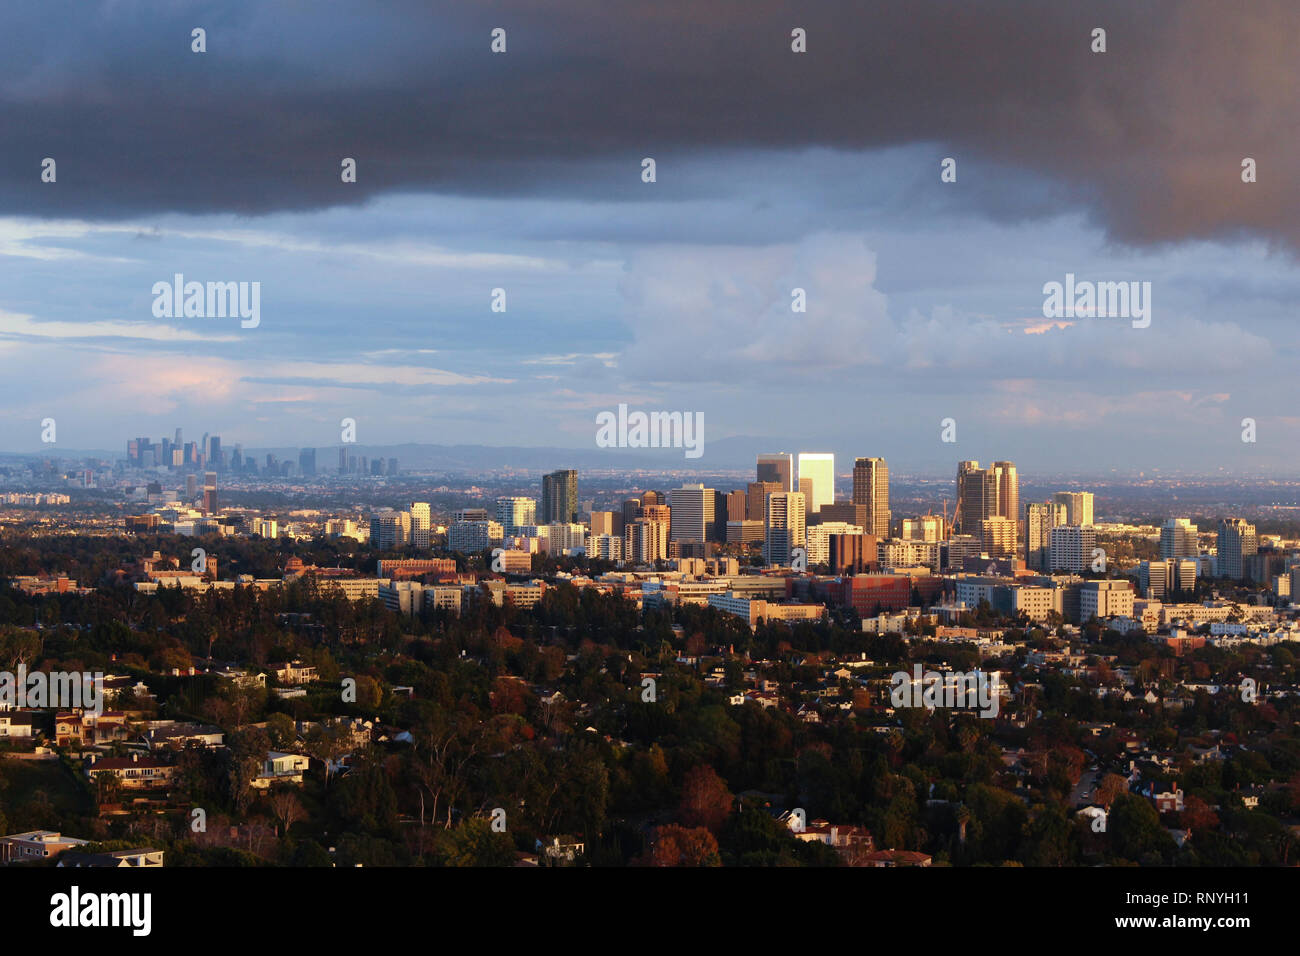 Clouds frame the city of the Los Angeles after a rainstorm from ocean to mountains as photographed from the Getty Center art complex. Stock Photo